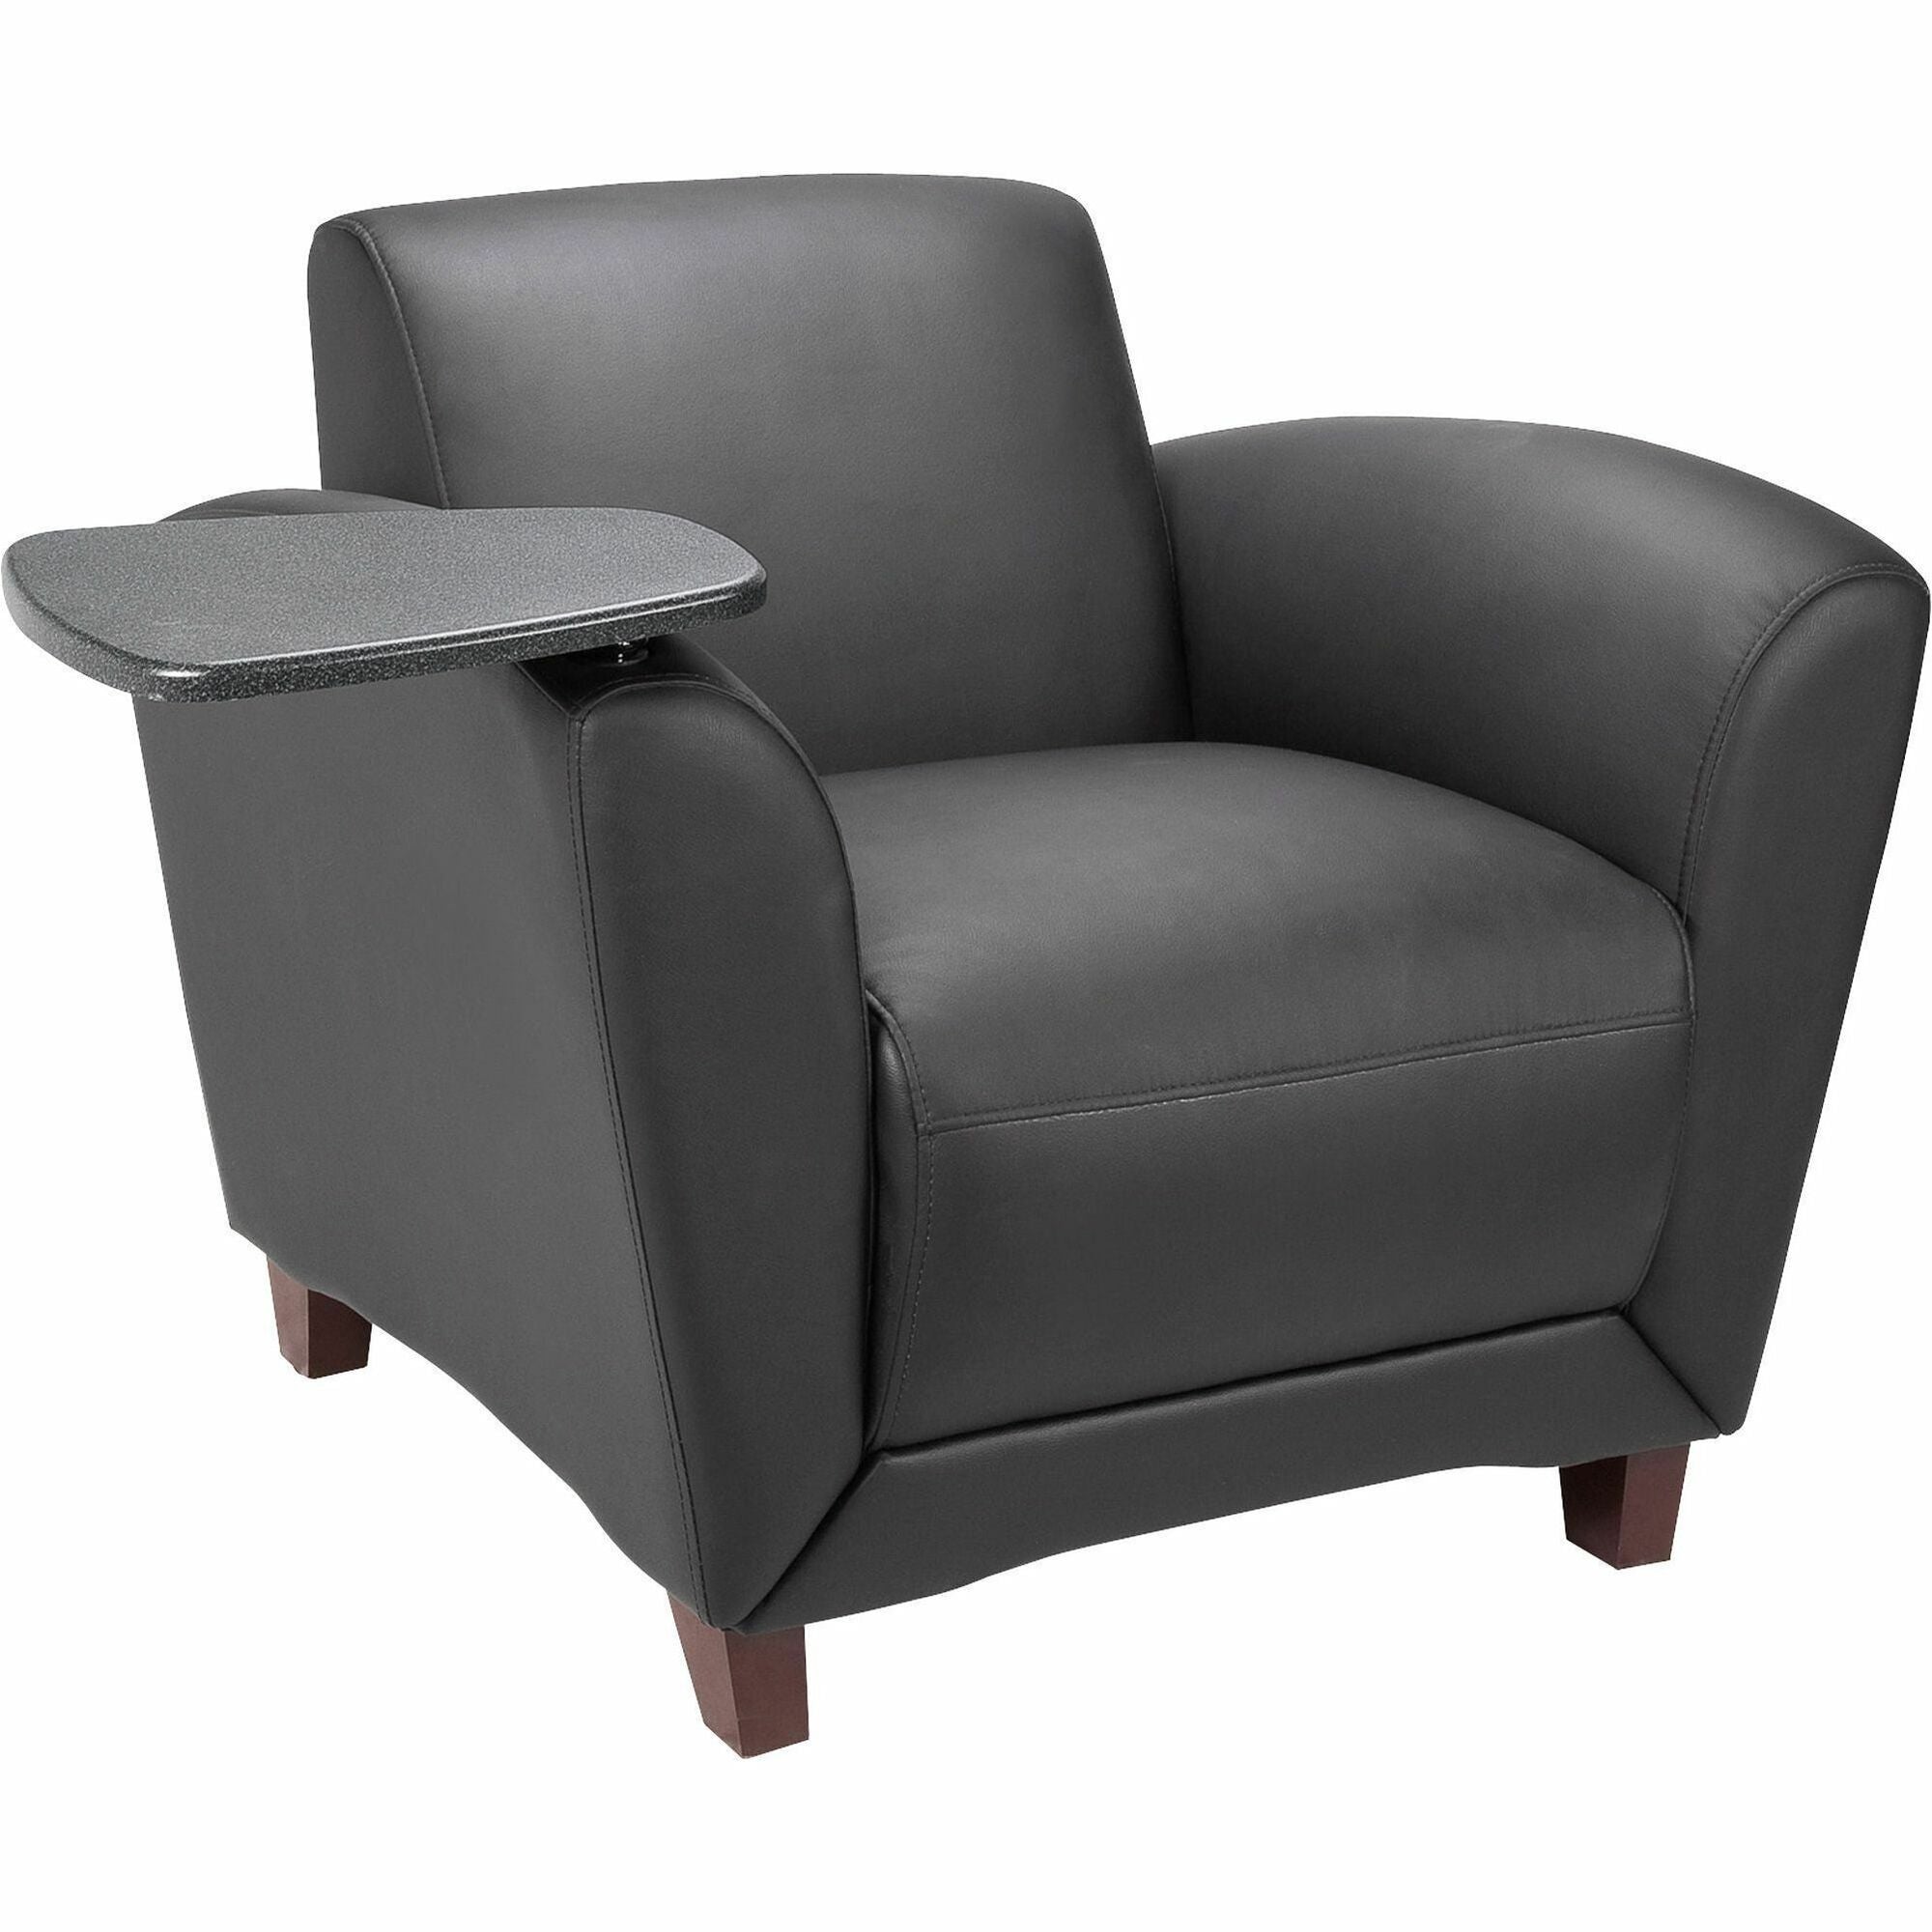 Lorell Accession Club Chair with Tablet Tray - Black Leather Seat - Four-legged Base - 1 Each - 